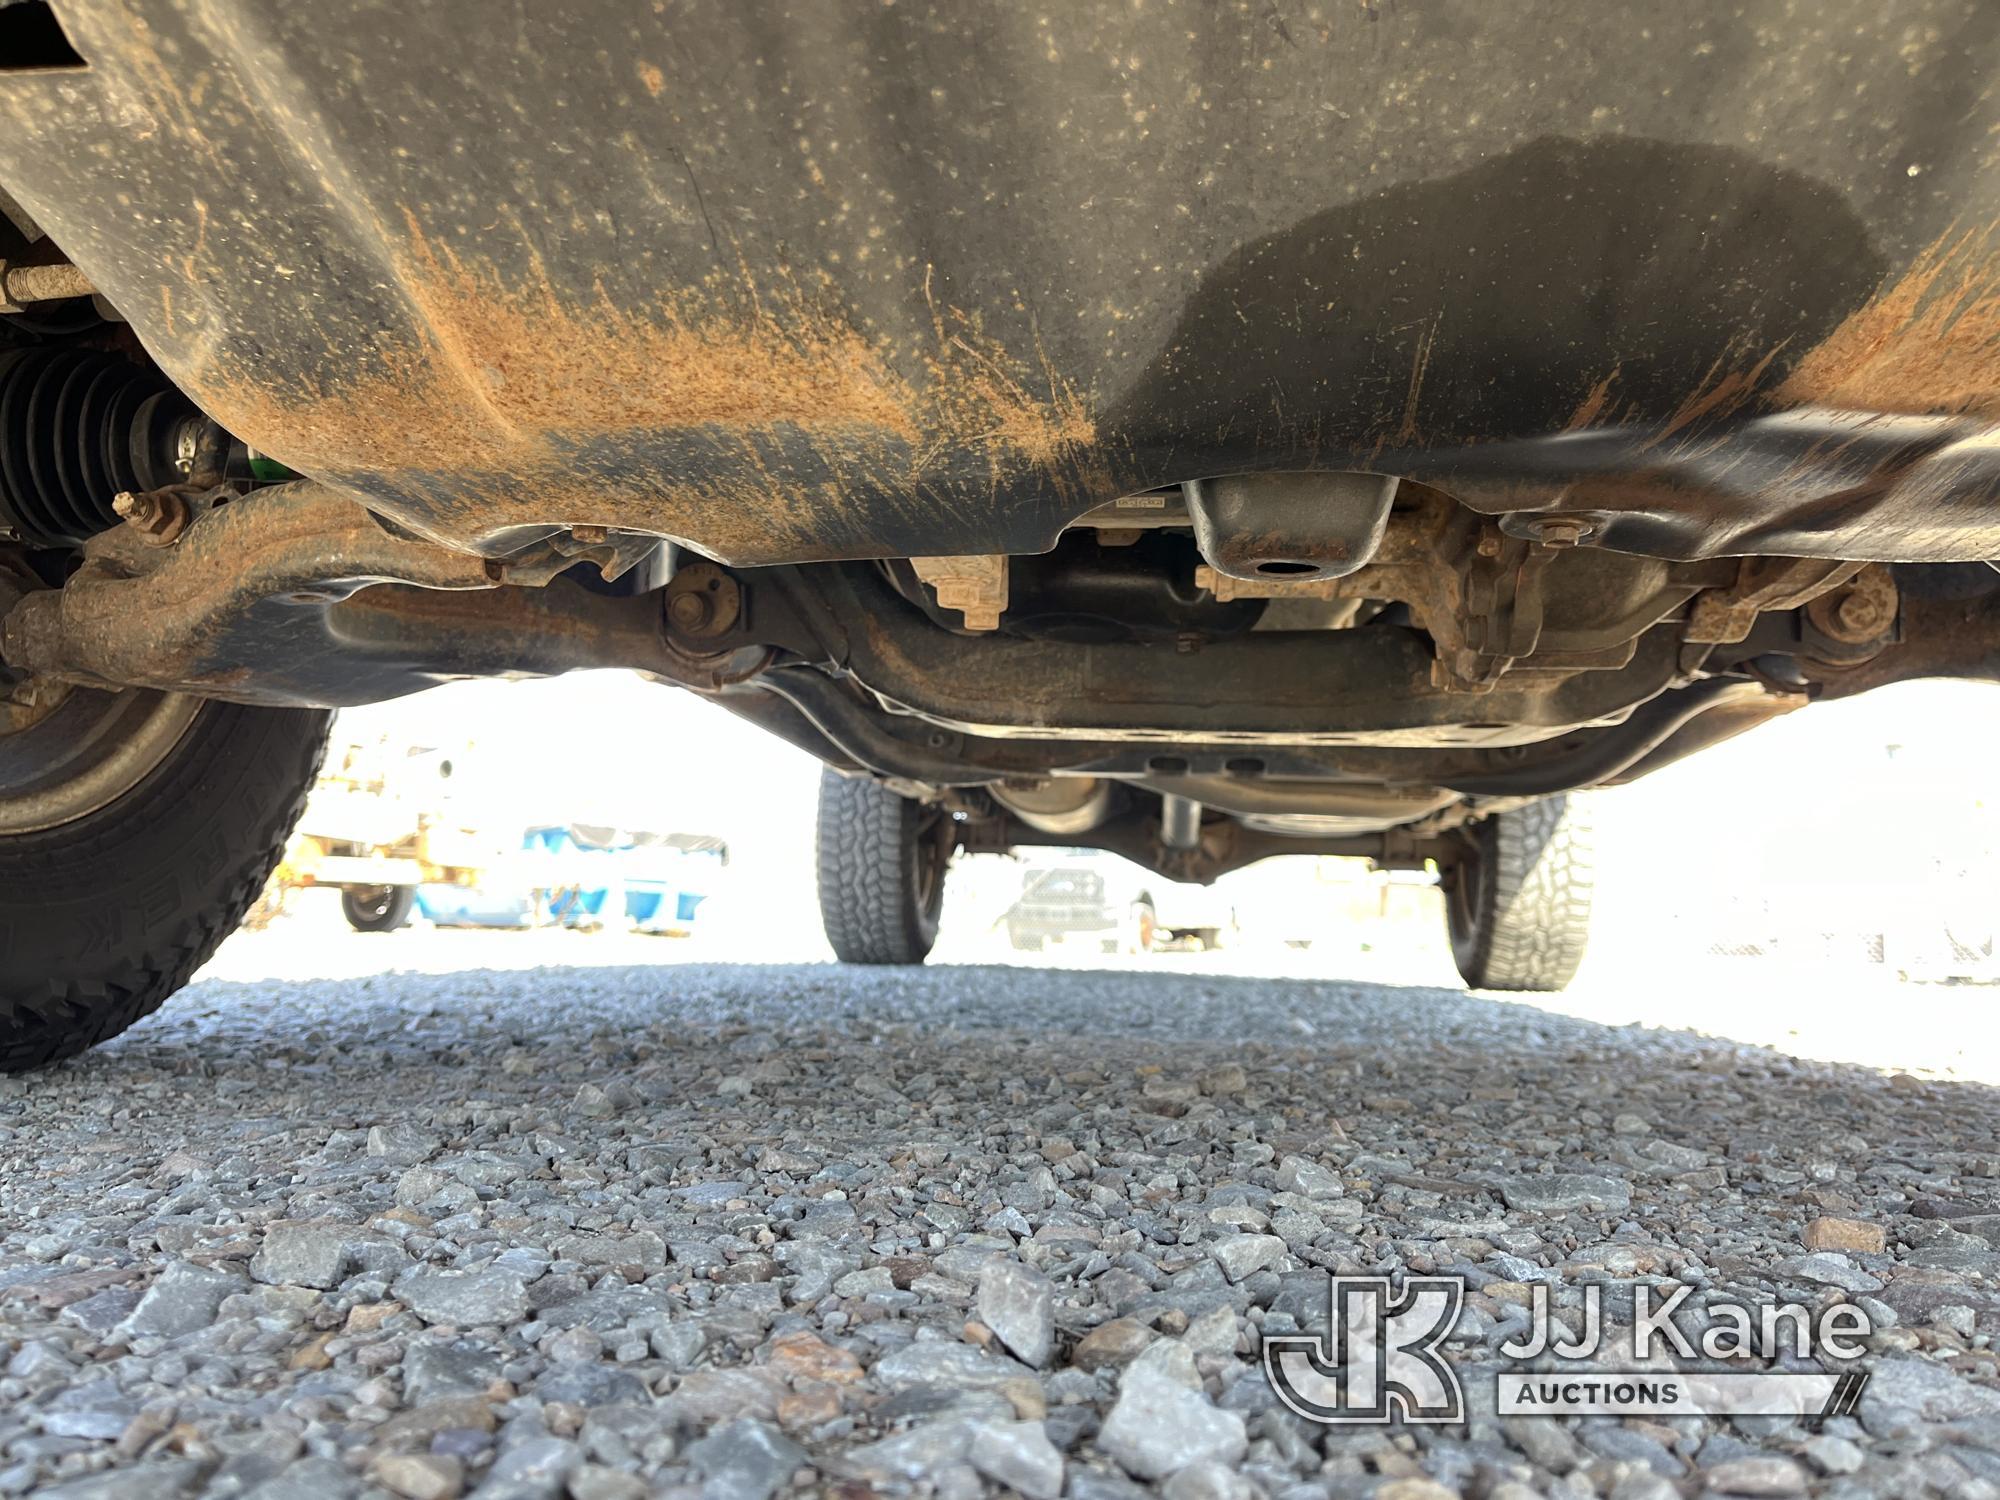 (Smock, PA) 2016 Toyota Tacoma 4x4 Extended-Cab Pickup Truck Runs & Moves, Jump To Start, Cracked Ra